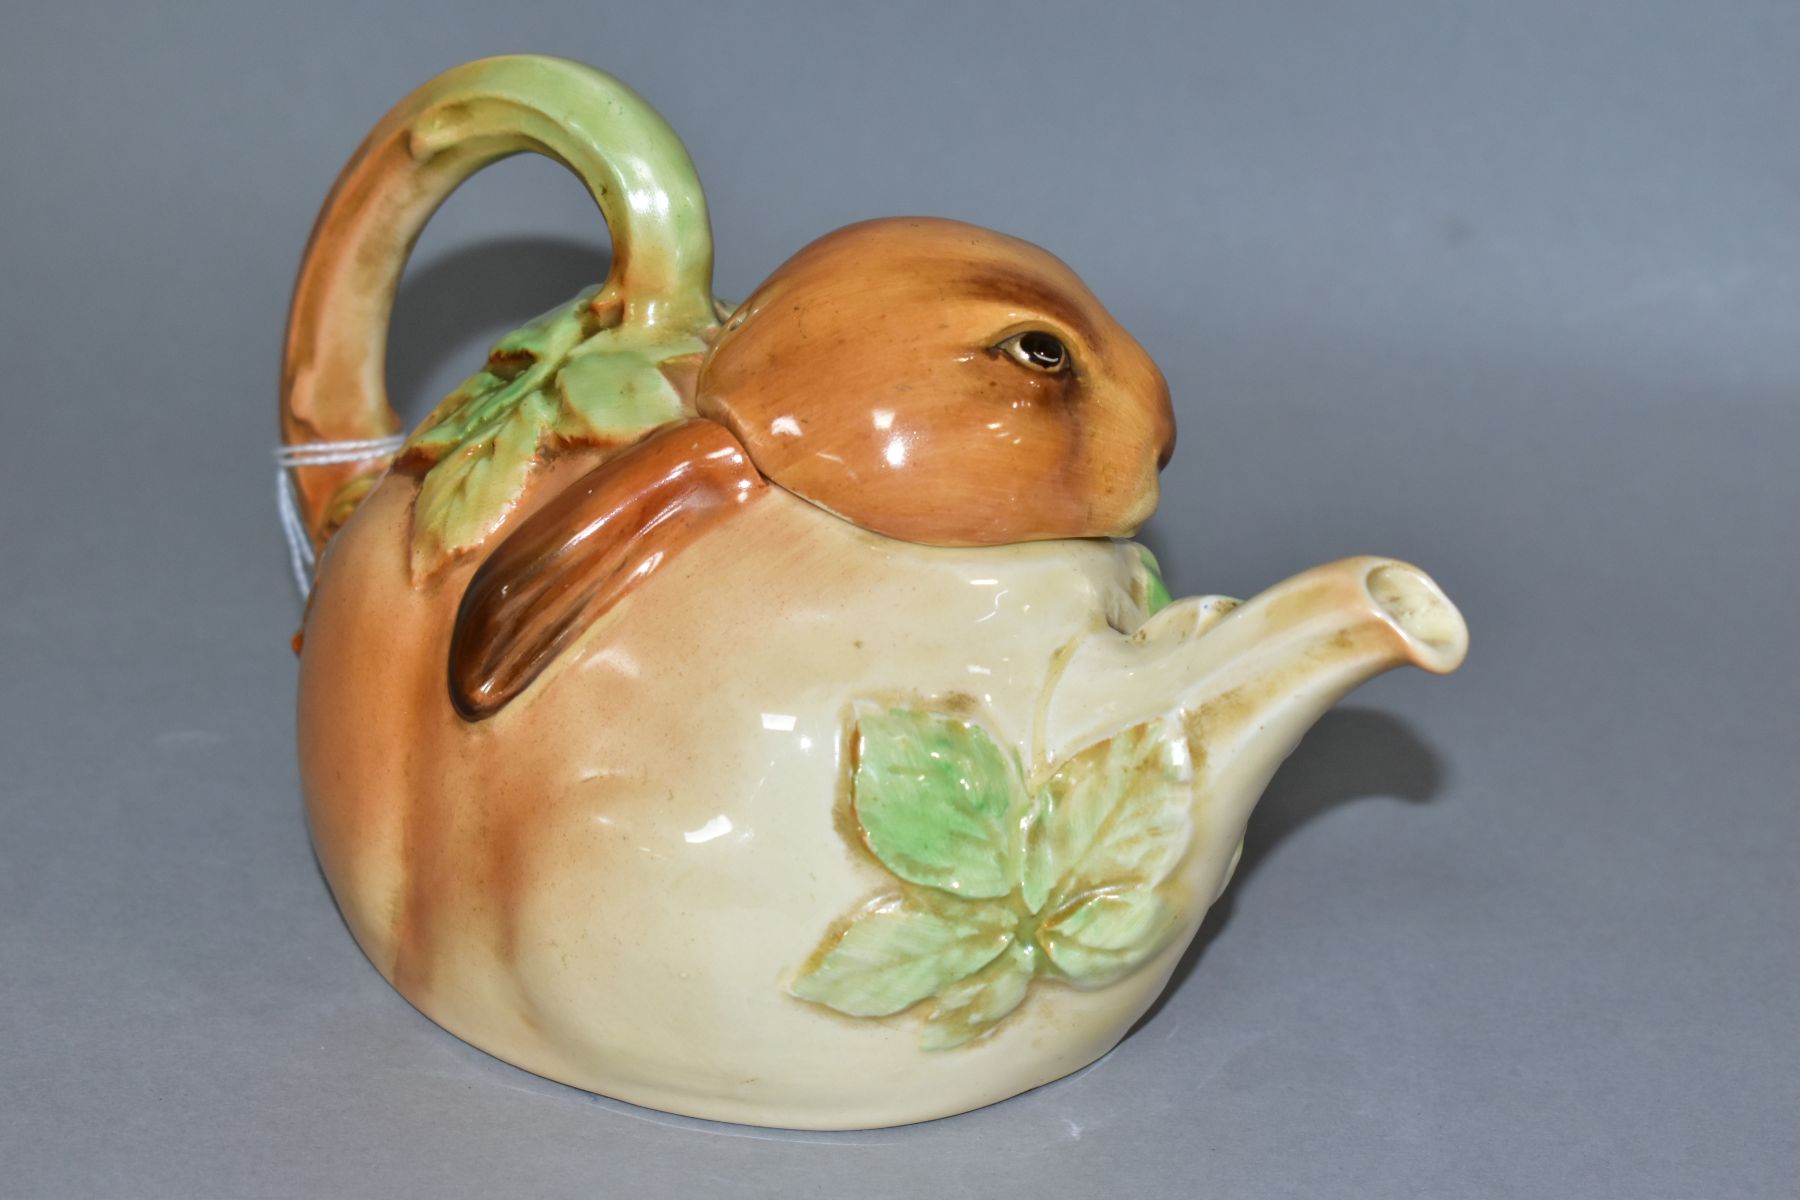 A 1930'S/40'S ROYAL DOULTON BUNNYKINS EARTHENWARE TEAPOT, D6010, designed by Charles Noke, shaped as - Image 2 of 5